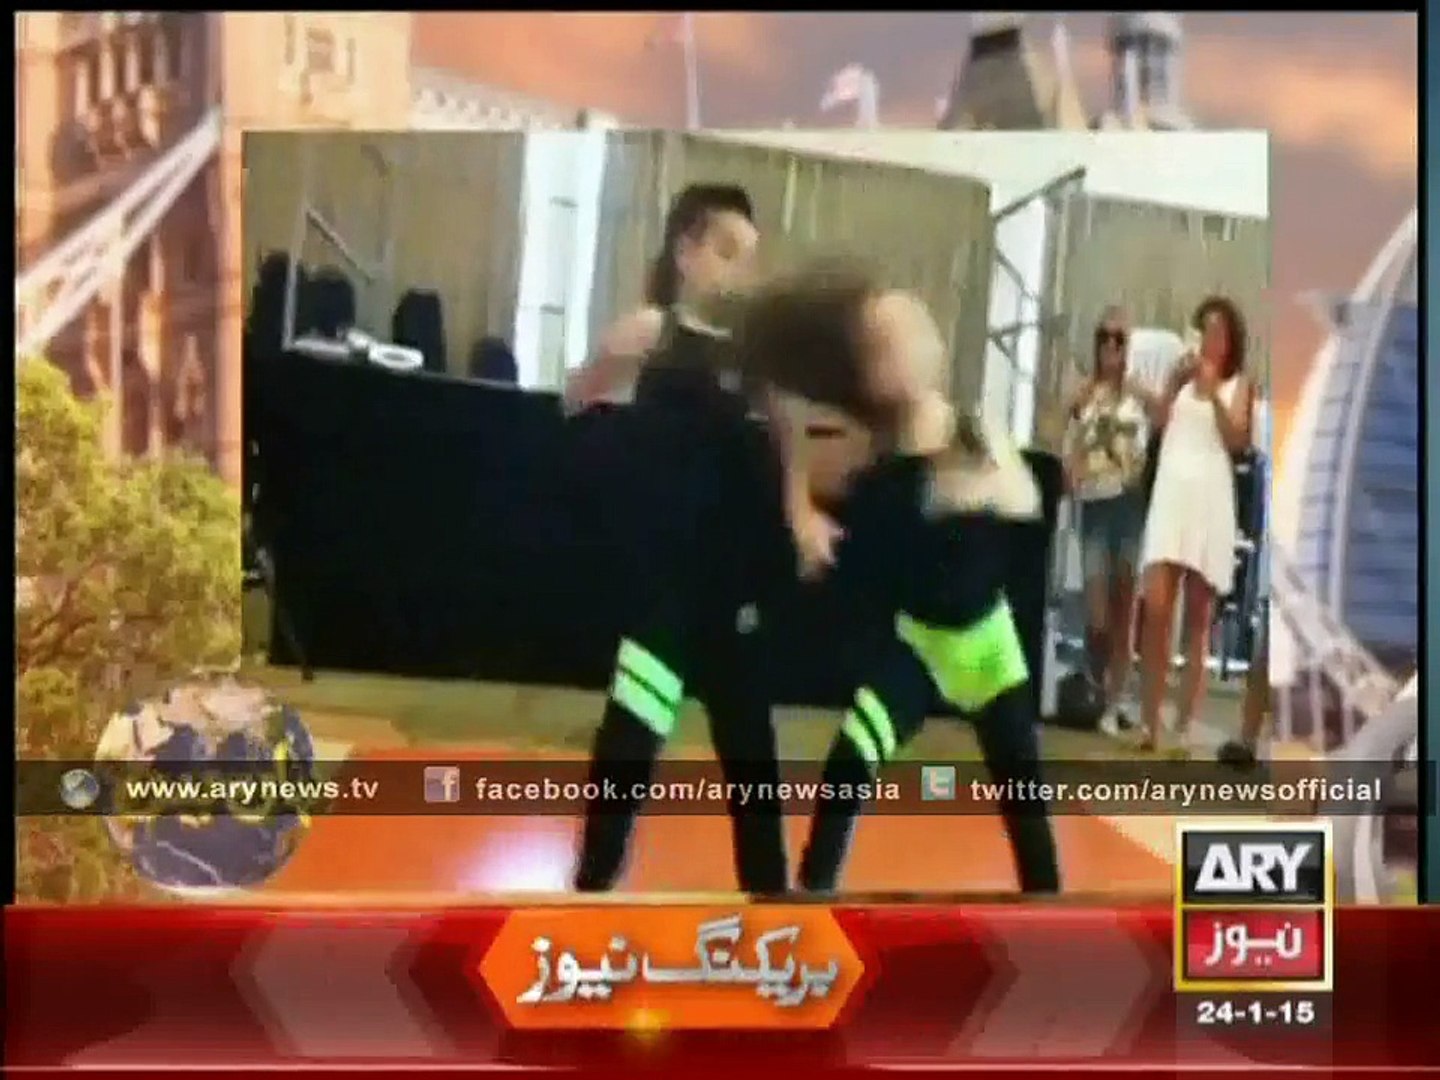 Awesome Dancing Kids  ARY NEWS TV